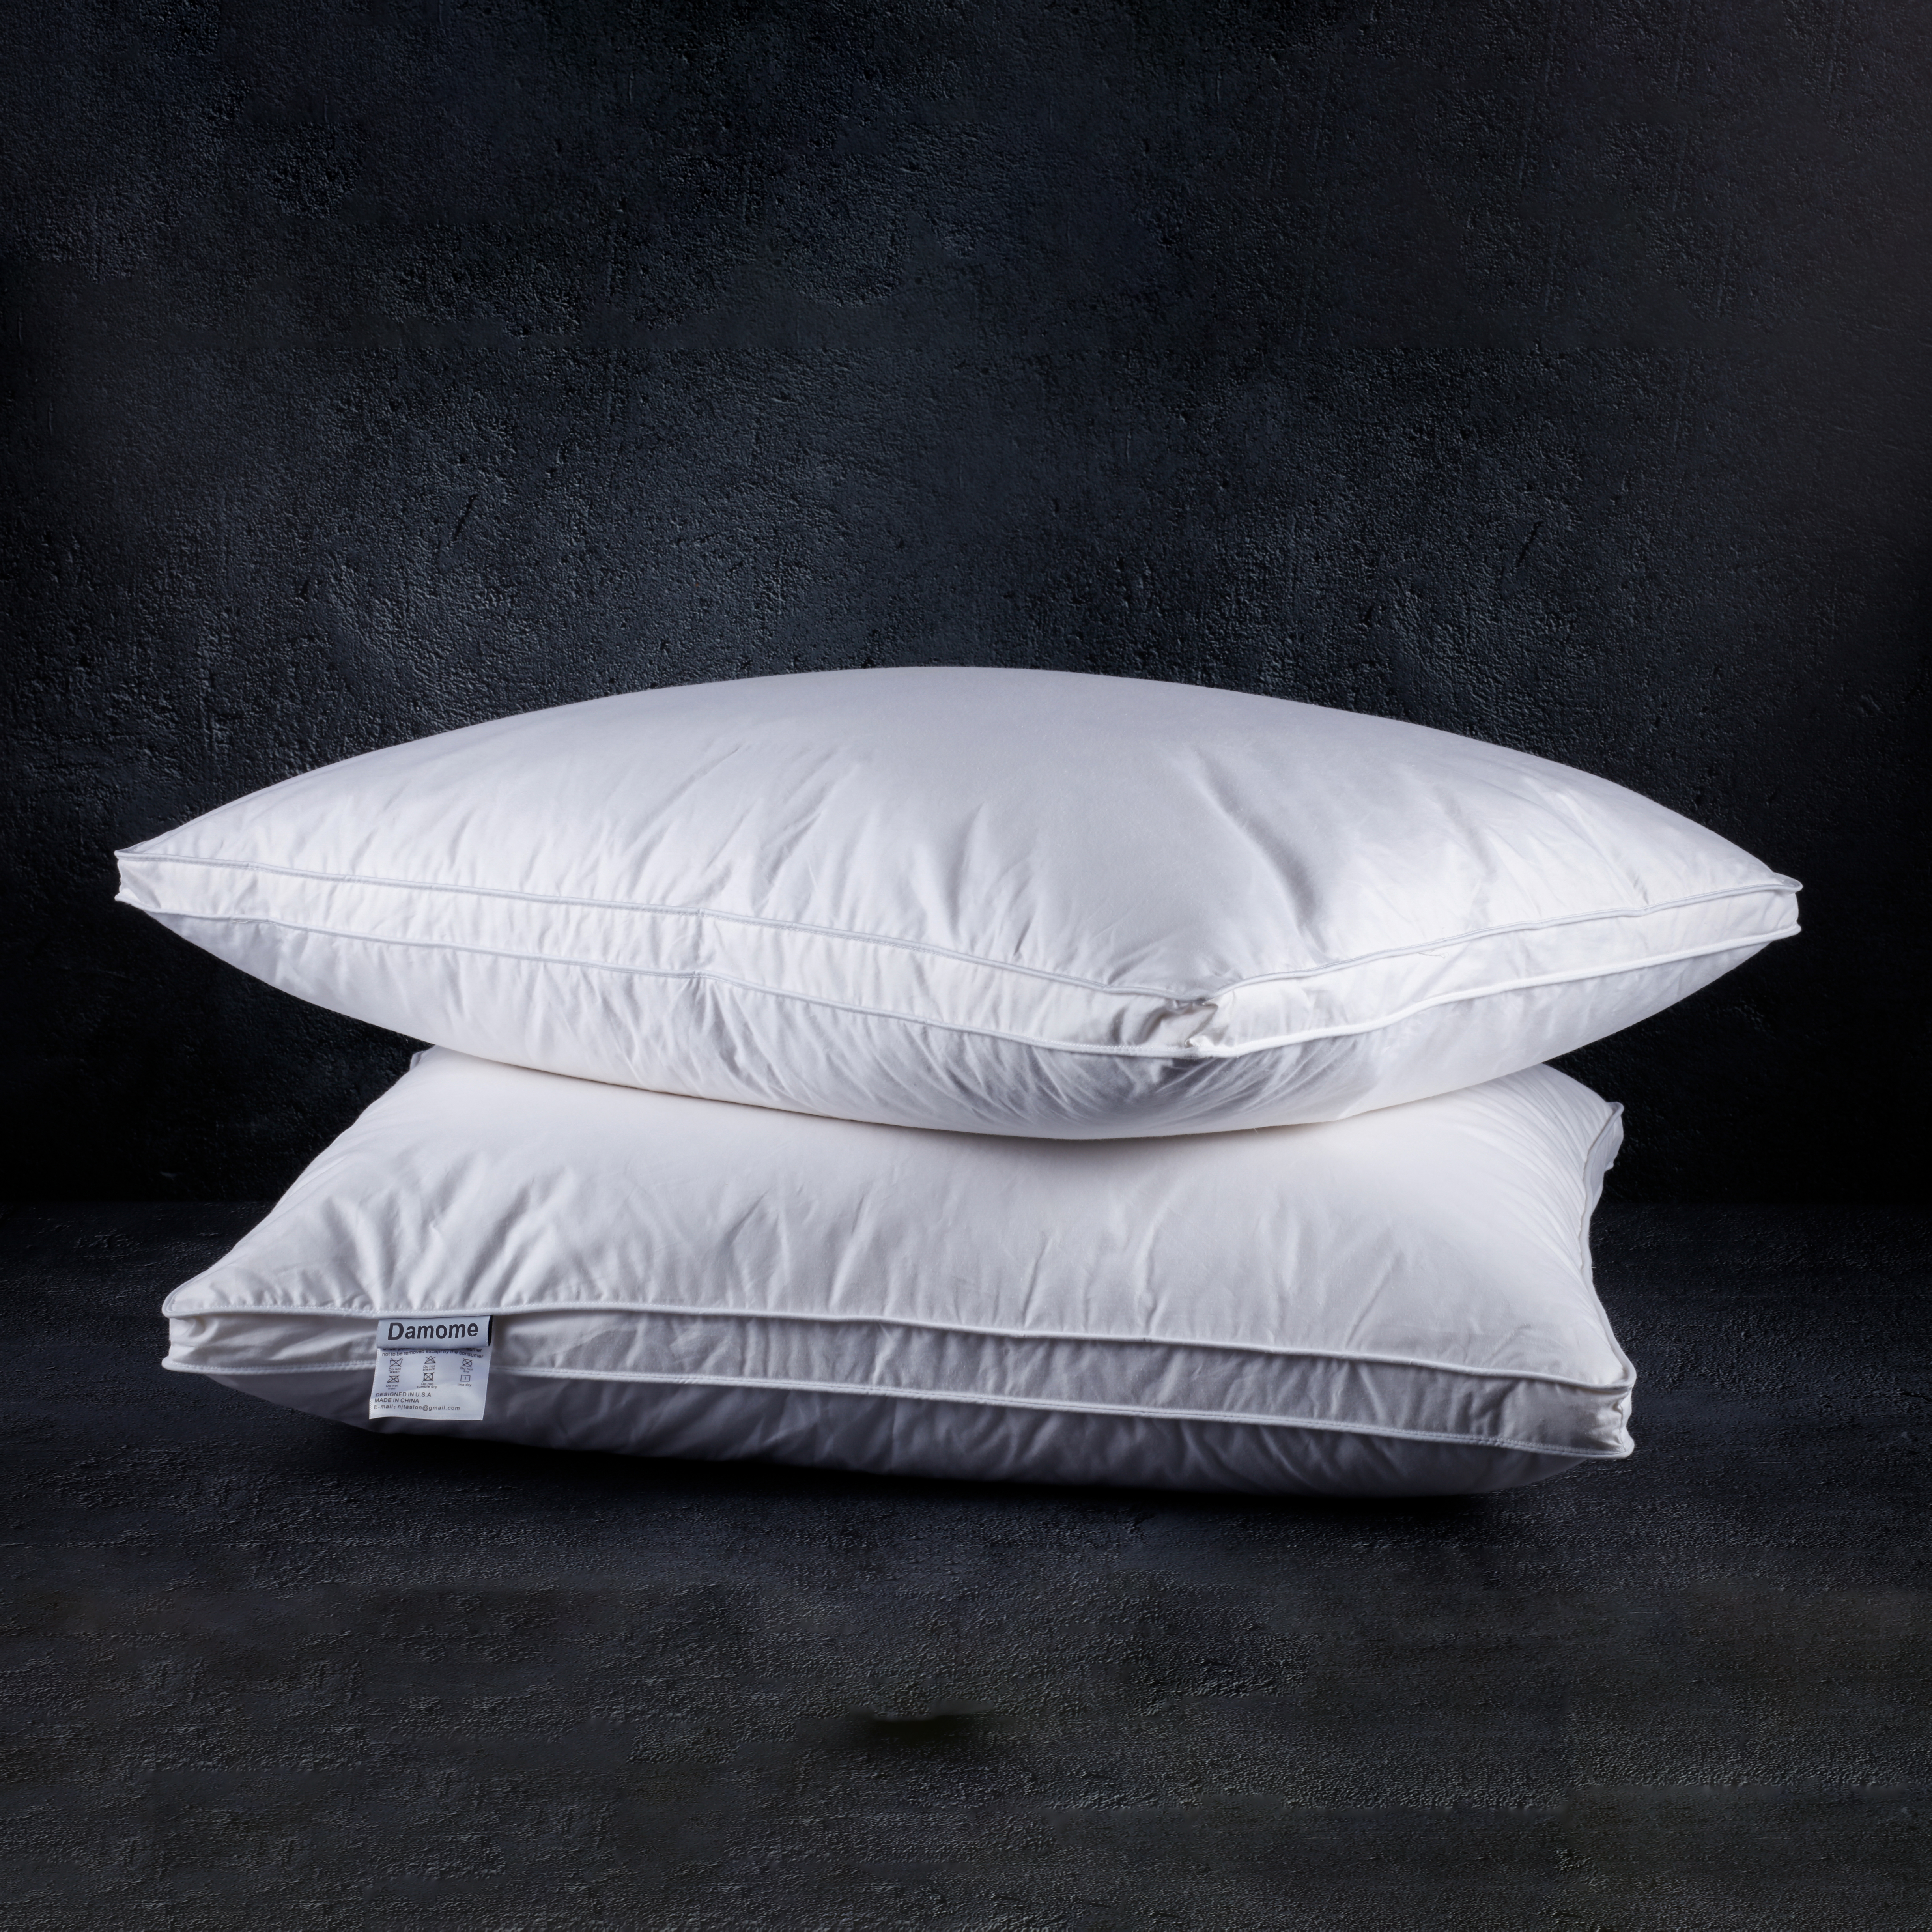 Damome Size: Standard Down Pillows for Sleeping(2 Pack), Standard(20inx26in)-White Goose Down Feather Bed Pillow Inserts, 100% Brushed Cotton Cover 40s/2, 233 Thread Count, Lightweight, for All Sleep 